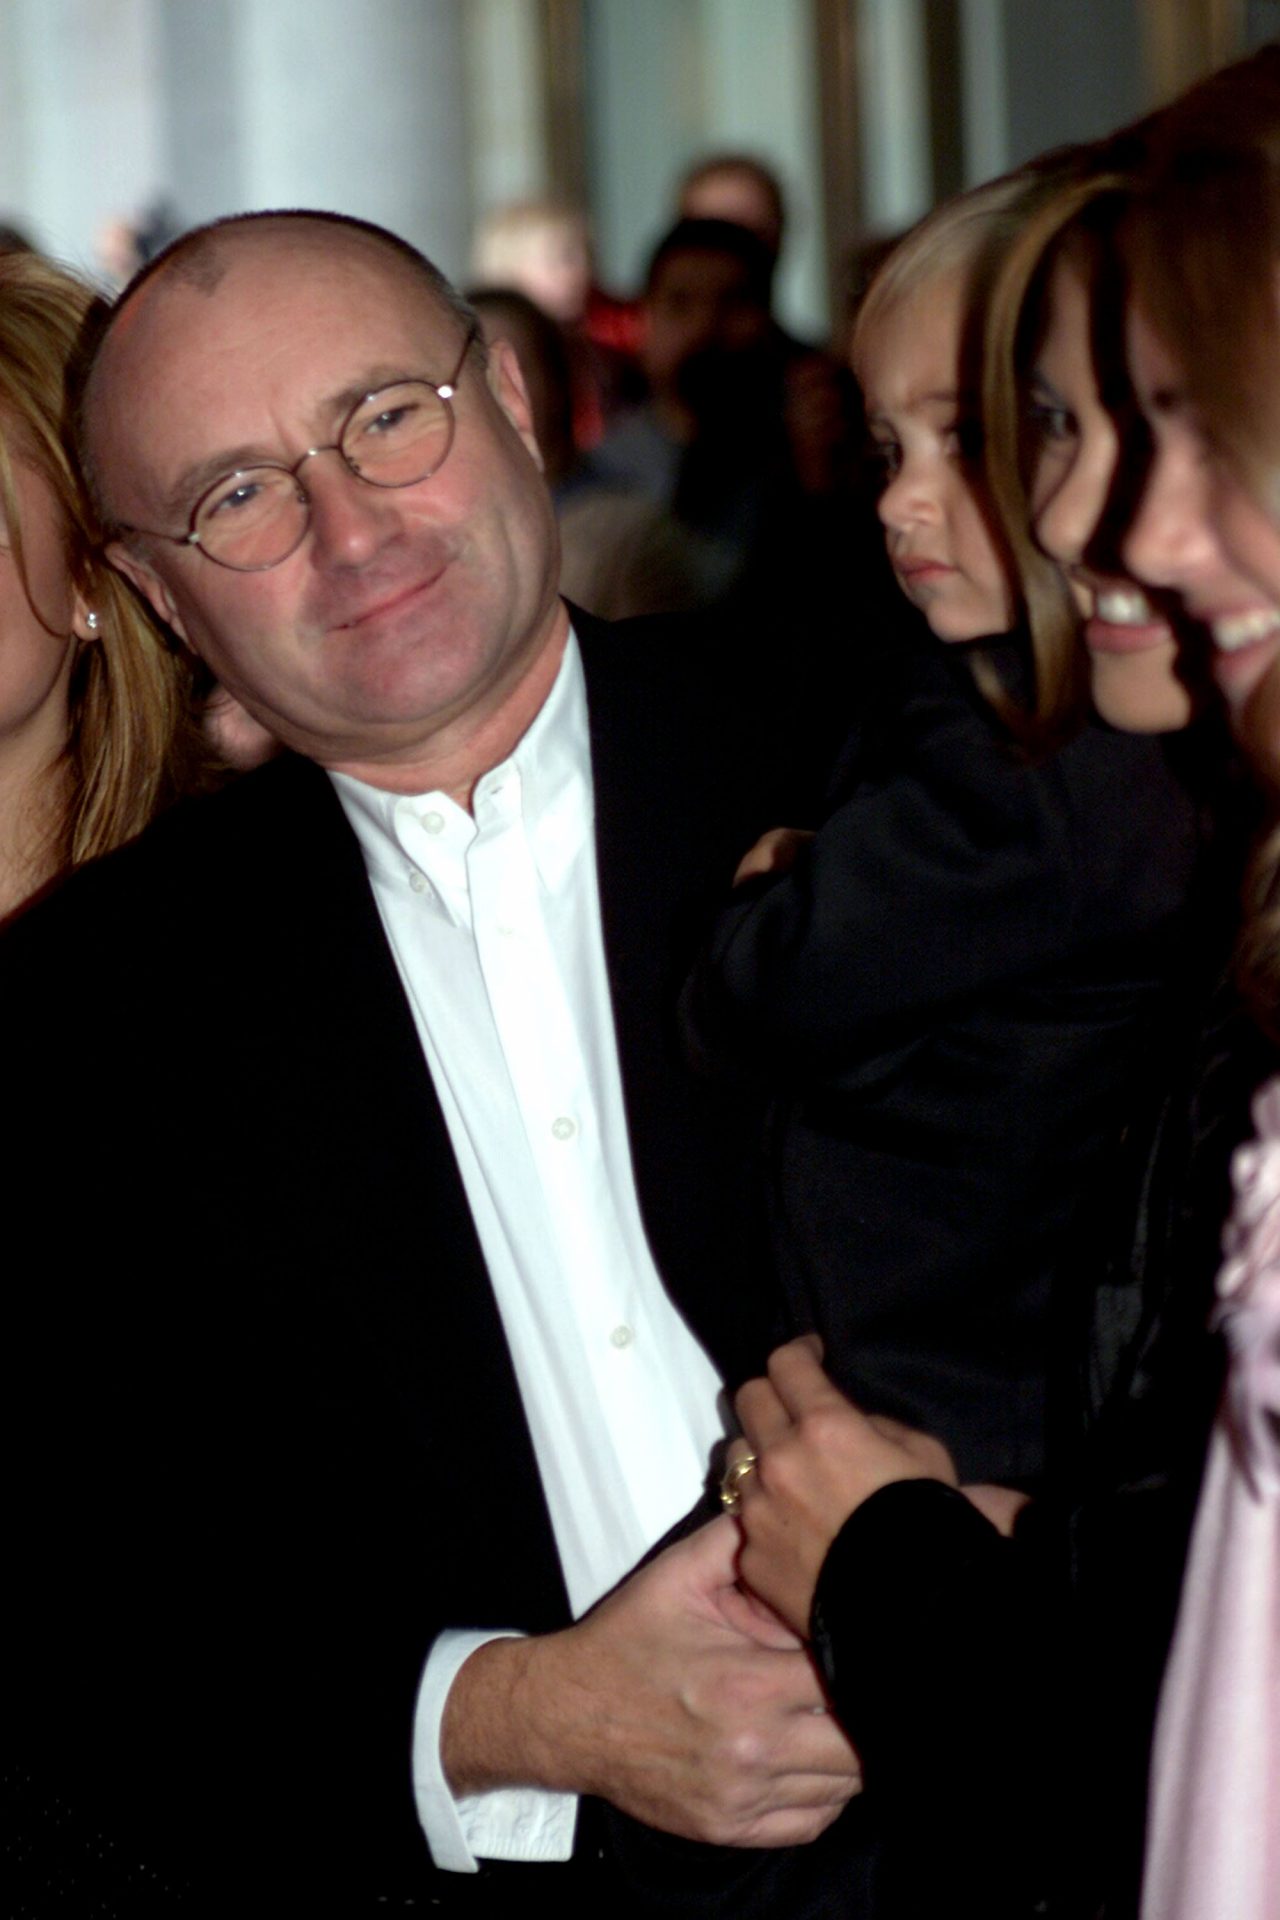 <p>Phil Collins, pictured here at the 'Brother Bear' premiere in New York, has worked on two Disney movie soundtracks. The aforementioned 'Brother Bear' (2003) and 'Tarzan' (1999). For Tarzan, he won the Oscar for Best Original Song.</p>